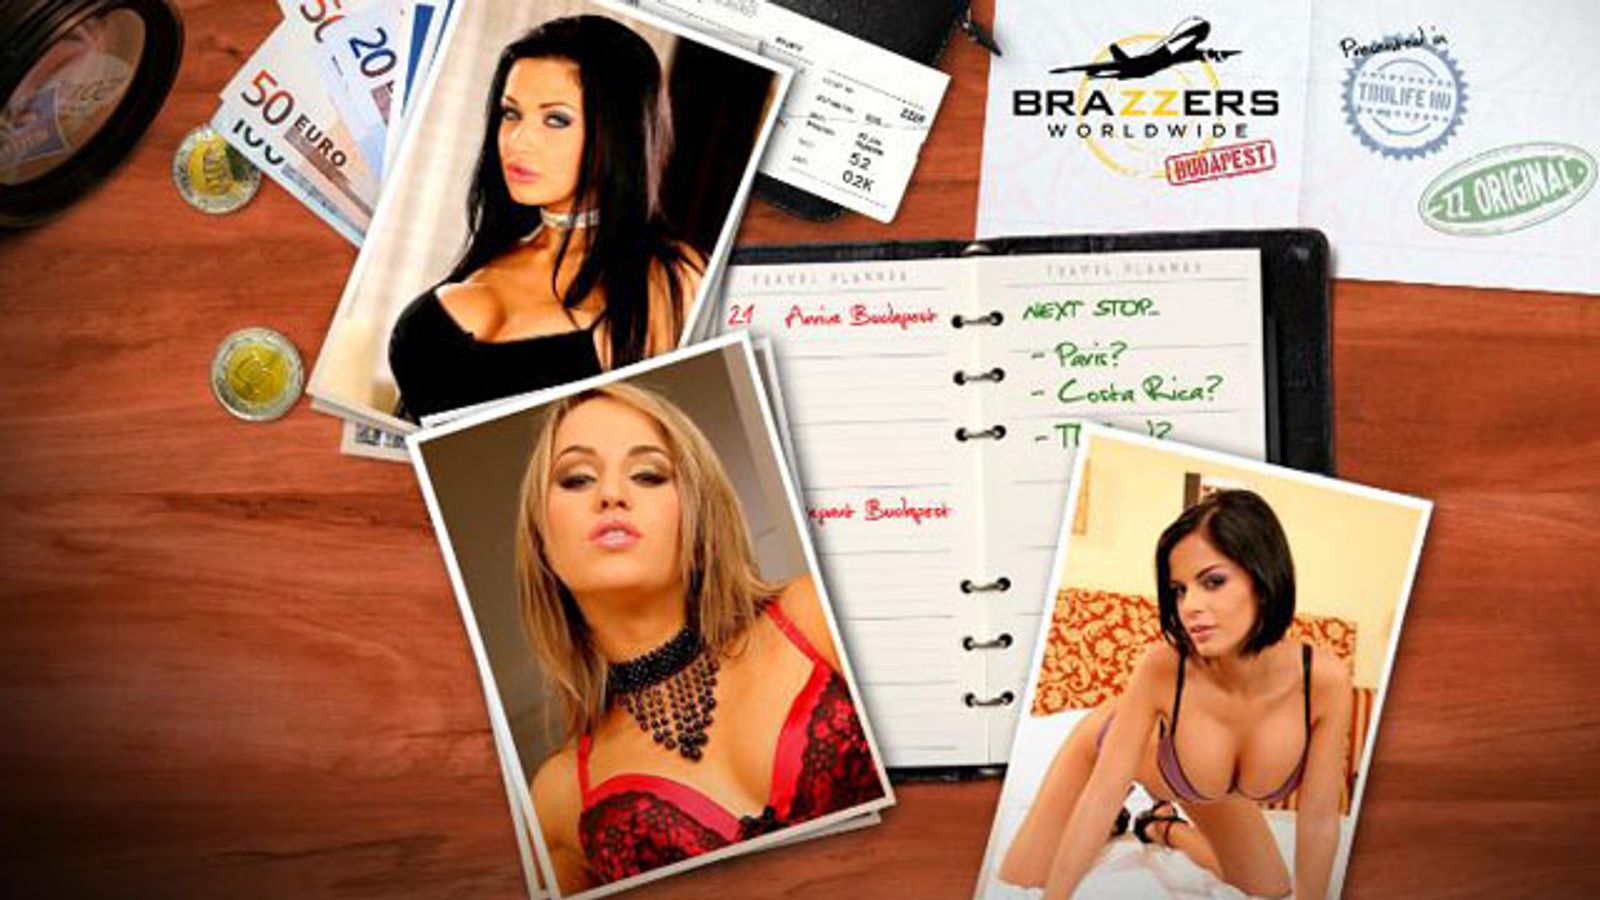 Brazzers Heads to Europe for Original Web Series